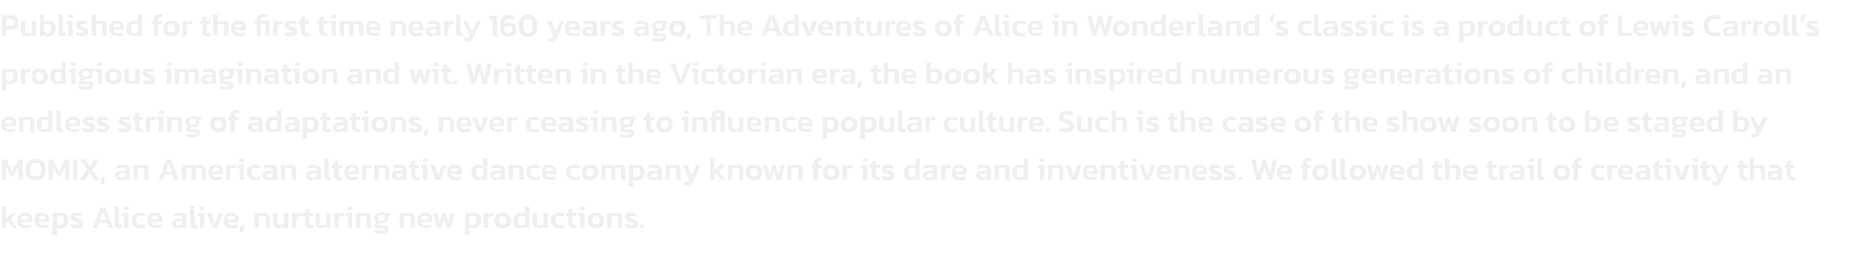 Published for the first time nearly 160 years ago, The Adventures of Alice in Wonderland s classic is a product of Lewis Carrolls prodigious imagination and wit. Written in the Victorian era, the book has inspired numerous generations of children, and an